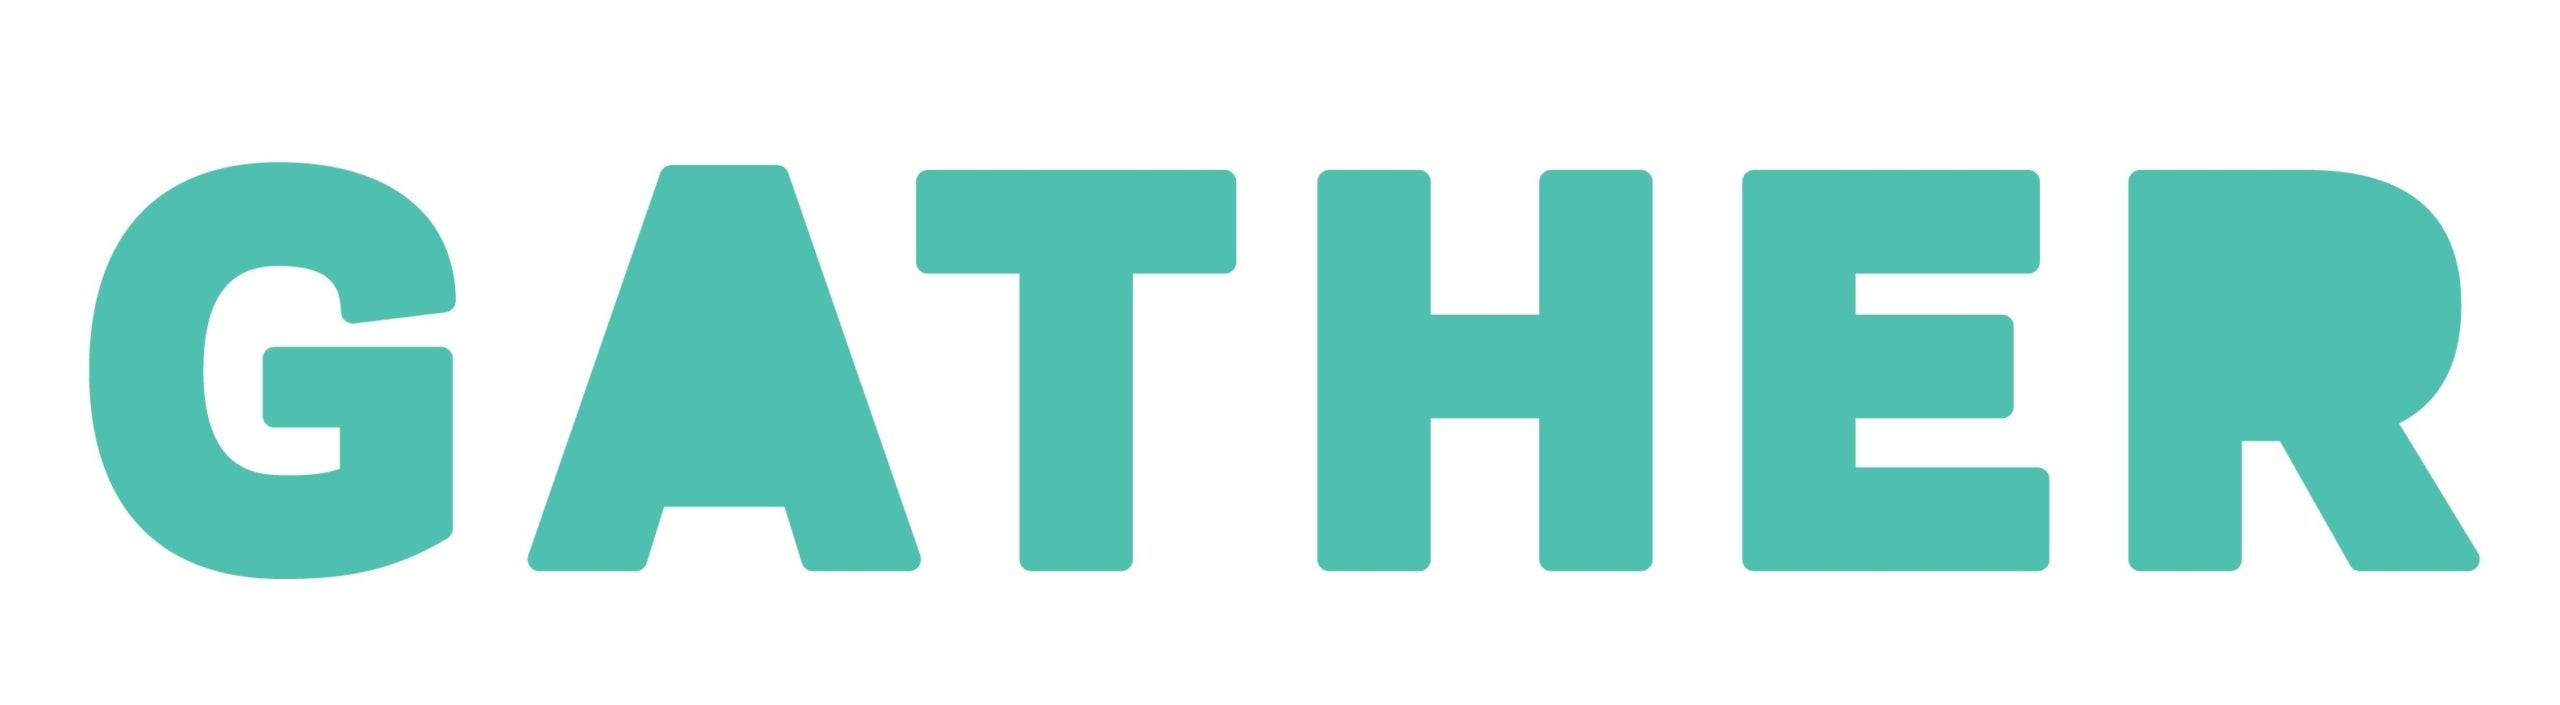 Blockprint logo for GATHER exhibition written in teal capital letters.